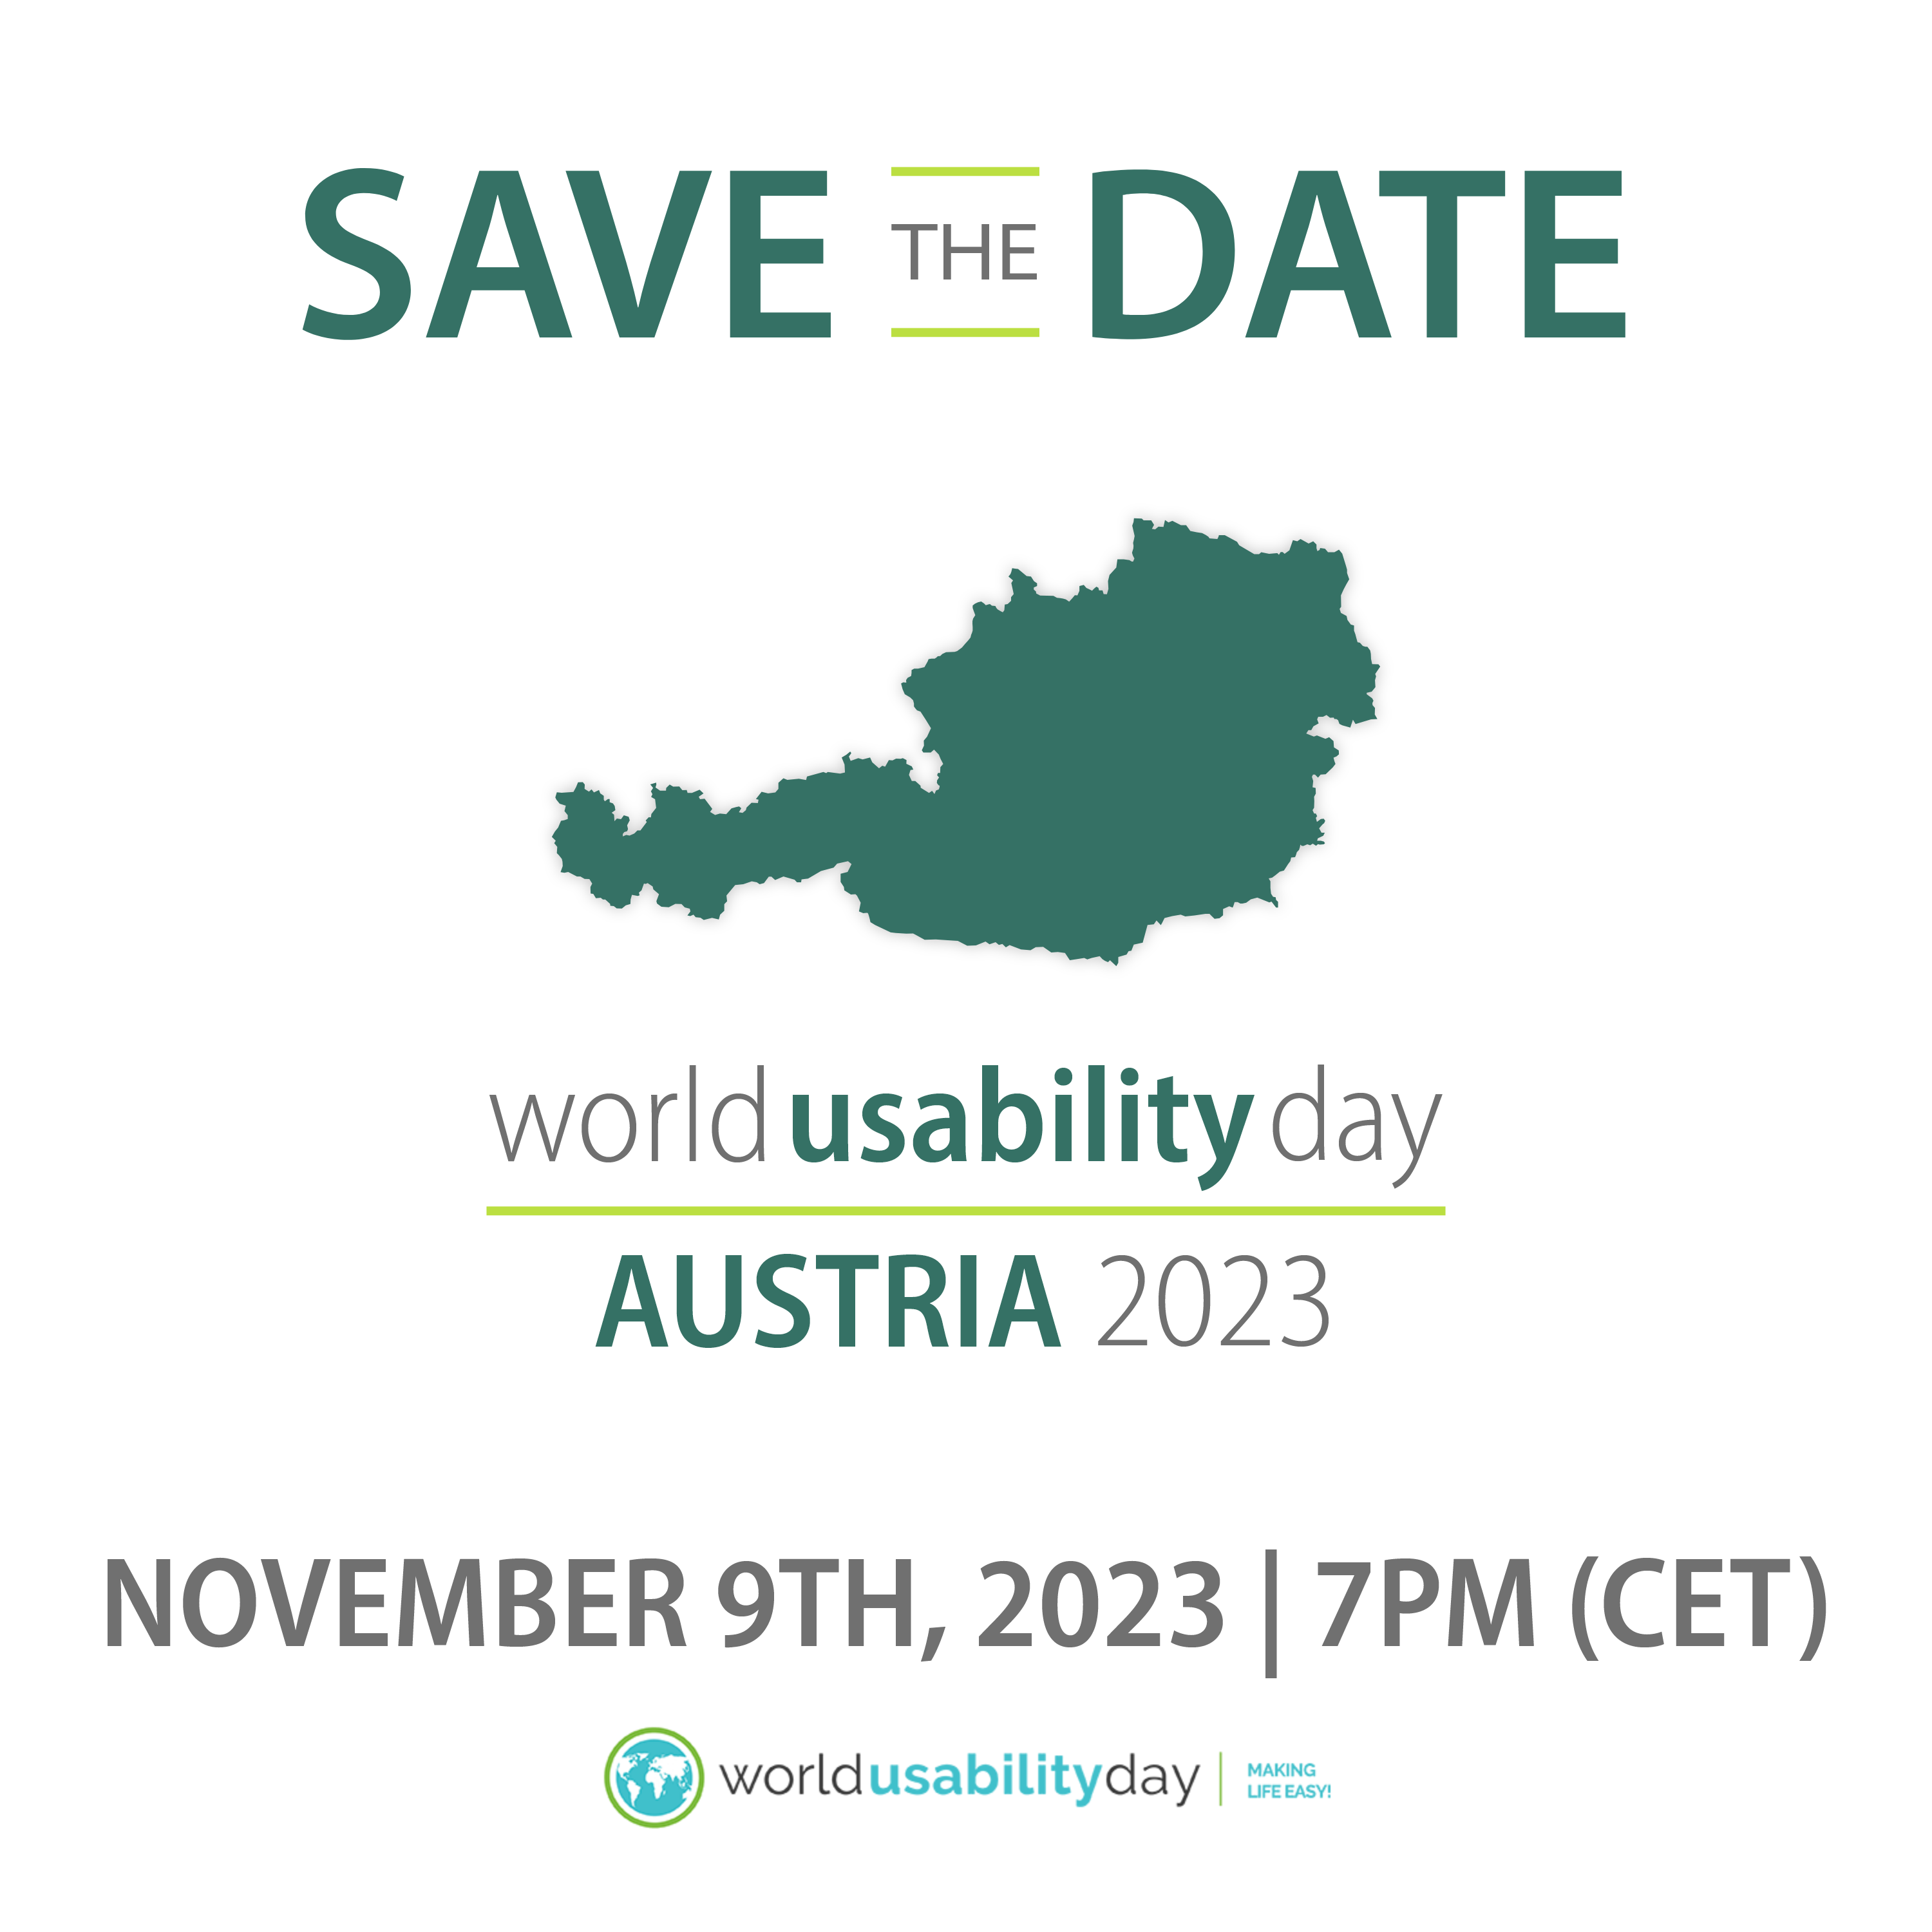 Save the Date: World Usability Day Austria 2023, 9 November 2023, 7:00PM (CET)